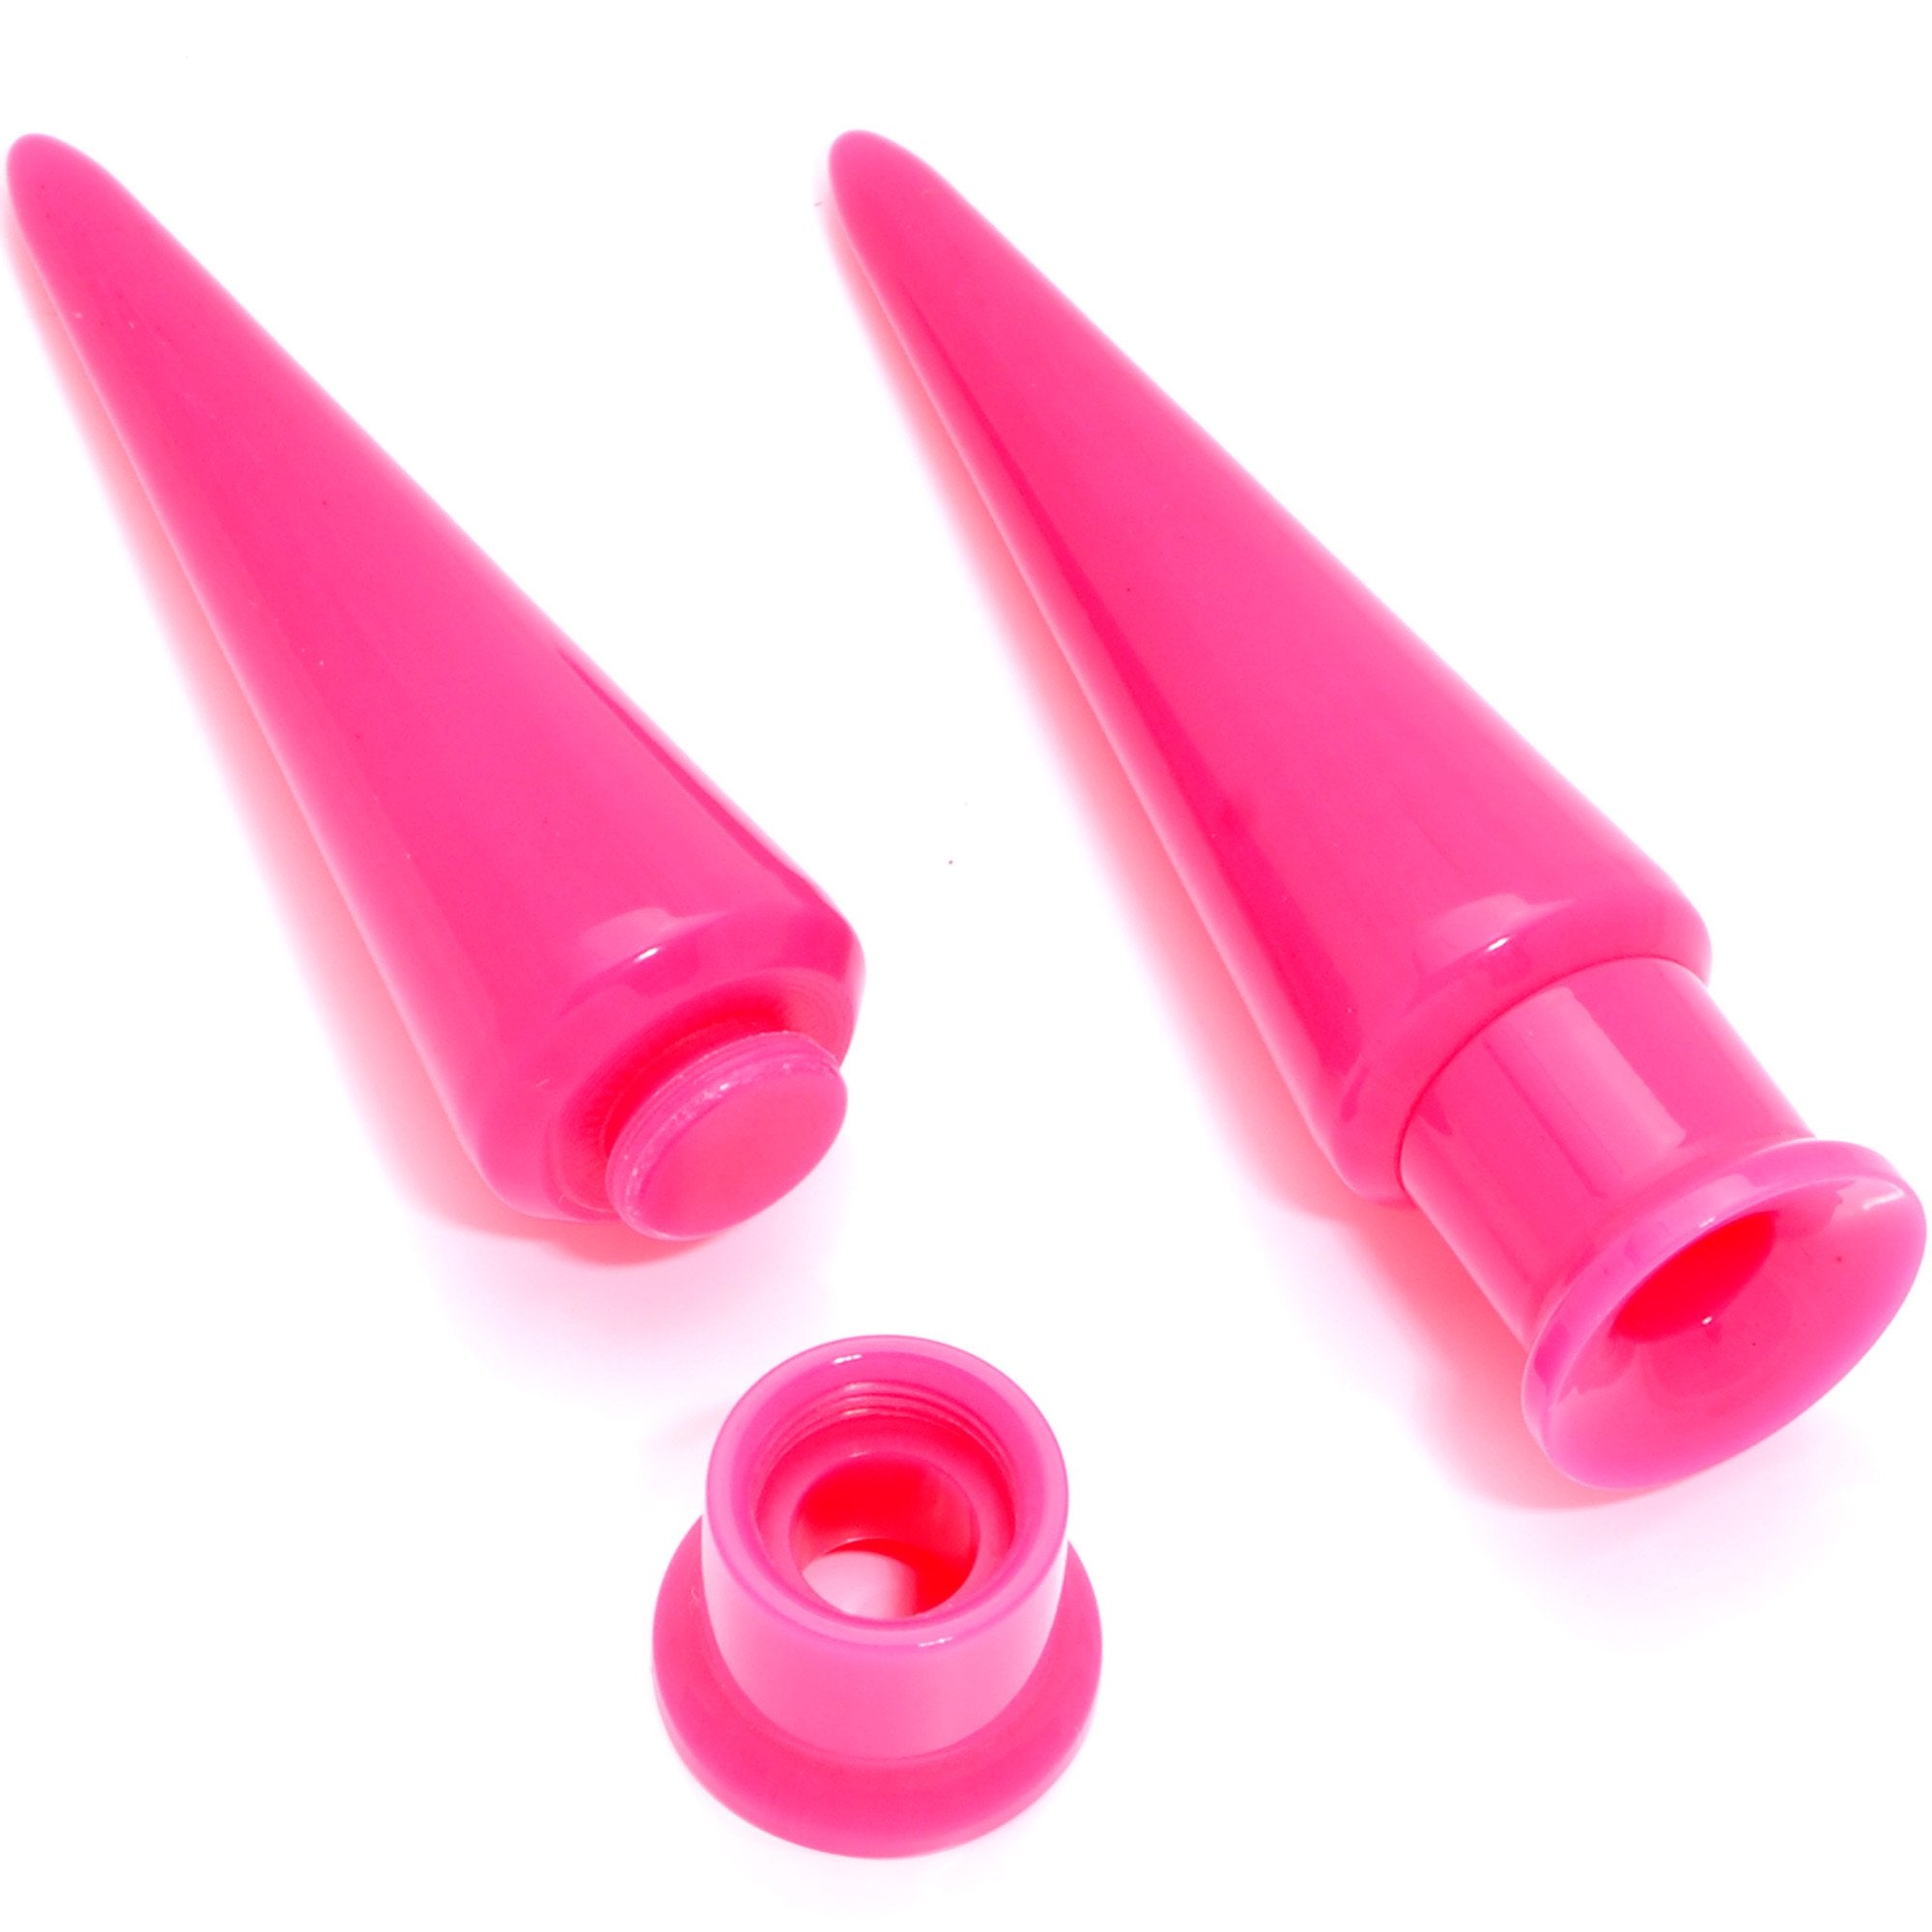 Hot Pink 2 in 1 Interchangeable Screw Fit Plug and Taper Set